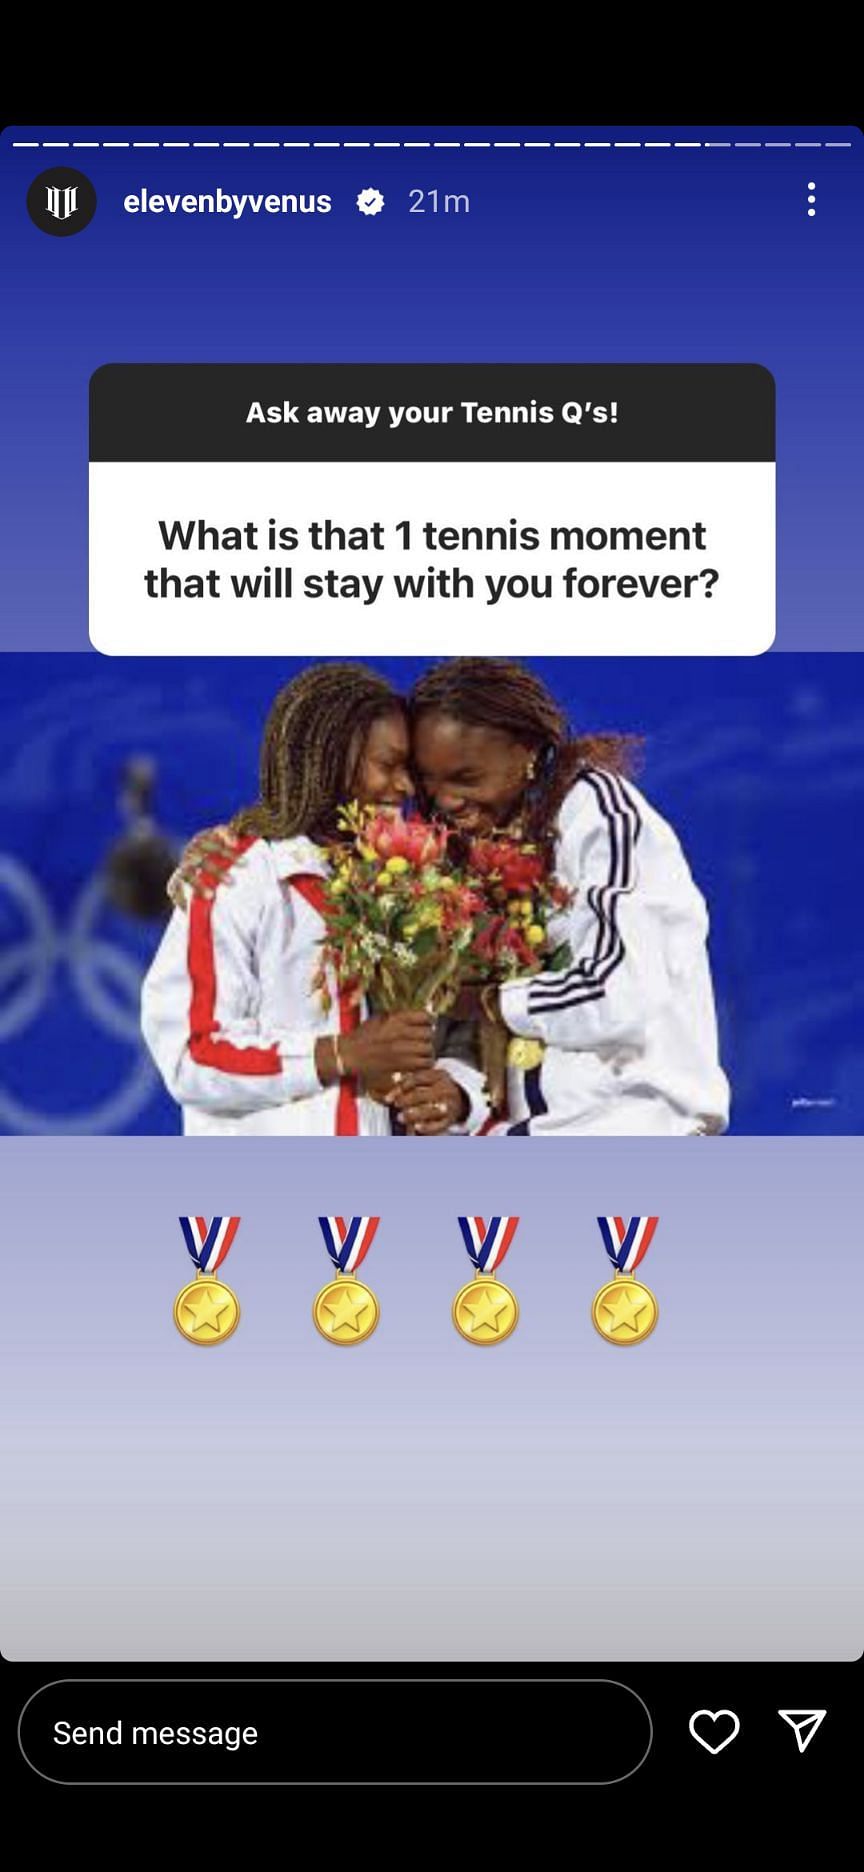 Venus and Serena Williams with their gold medals at the Olympics